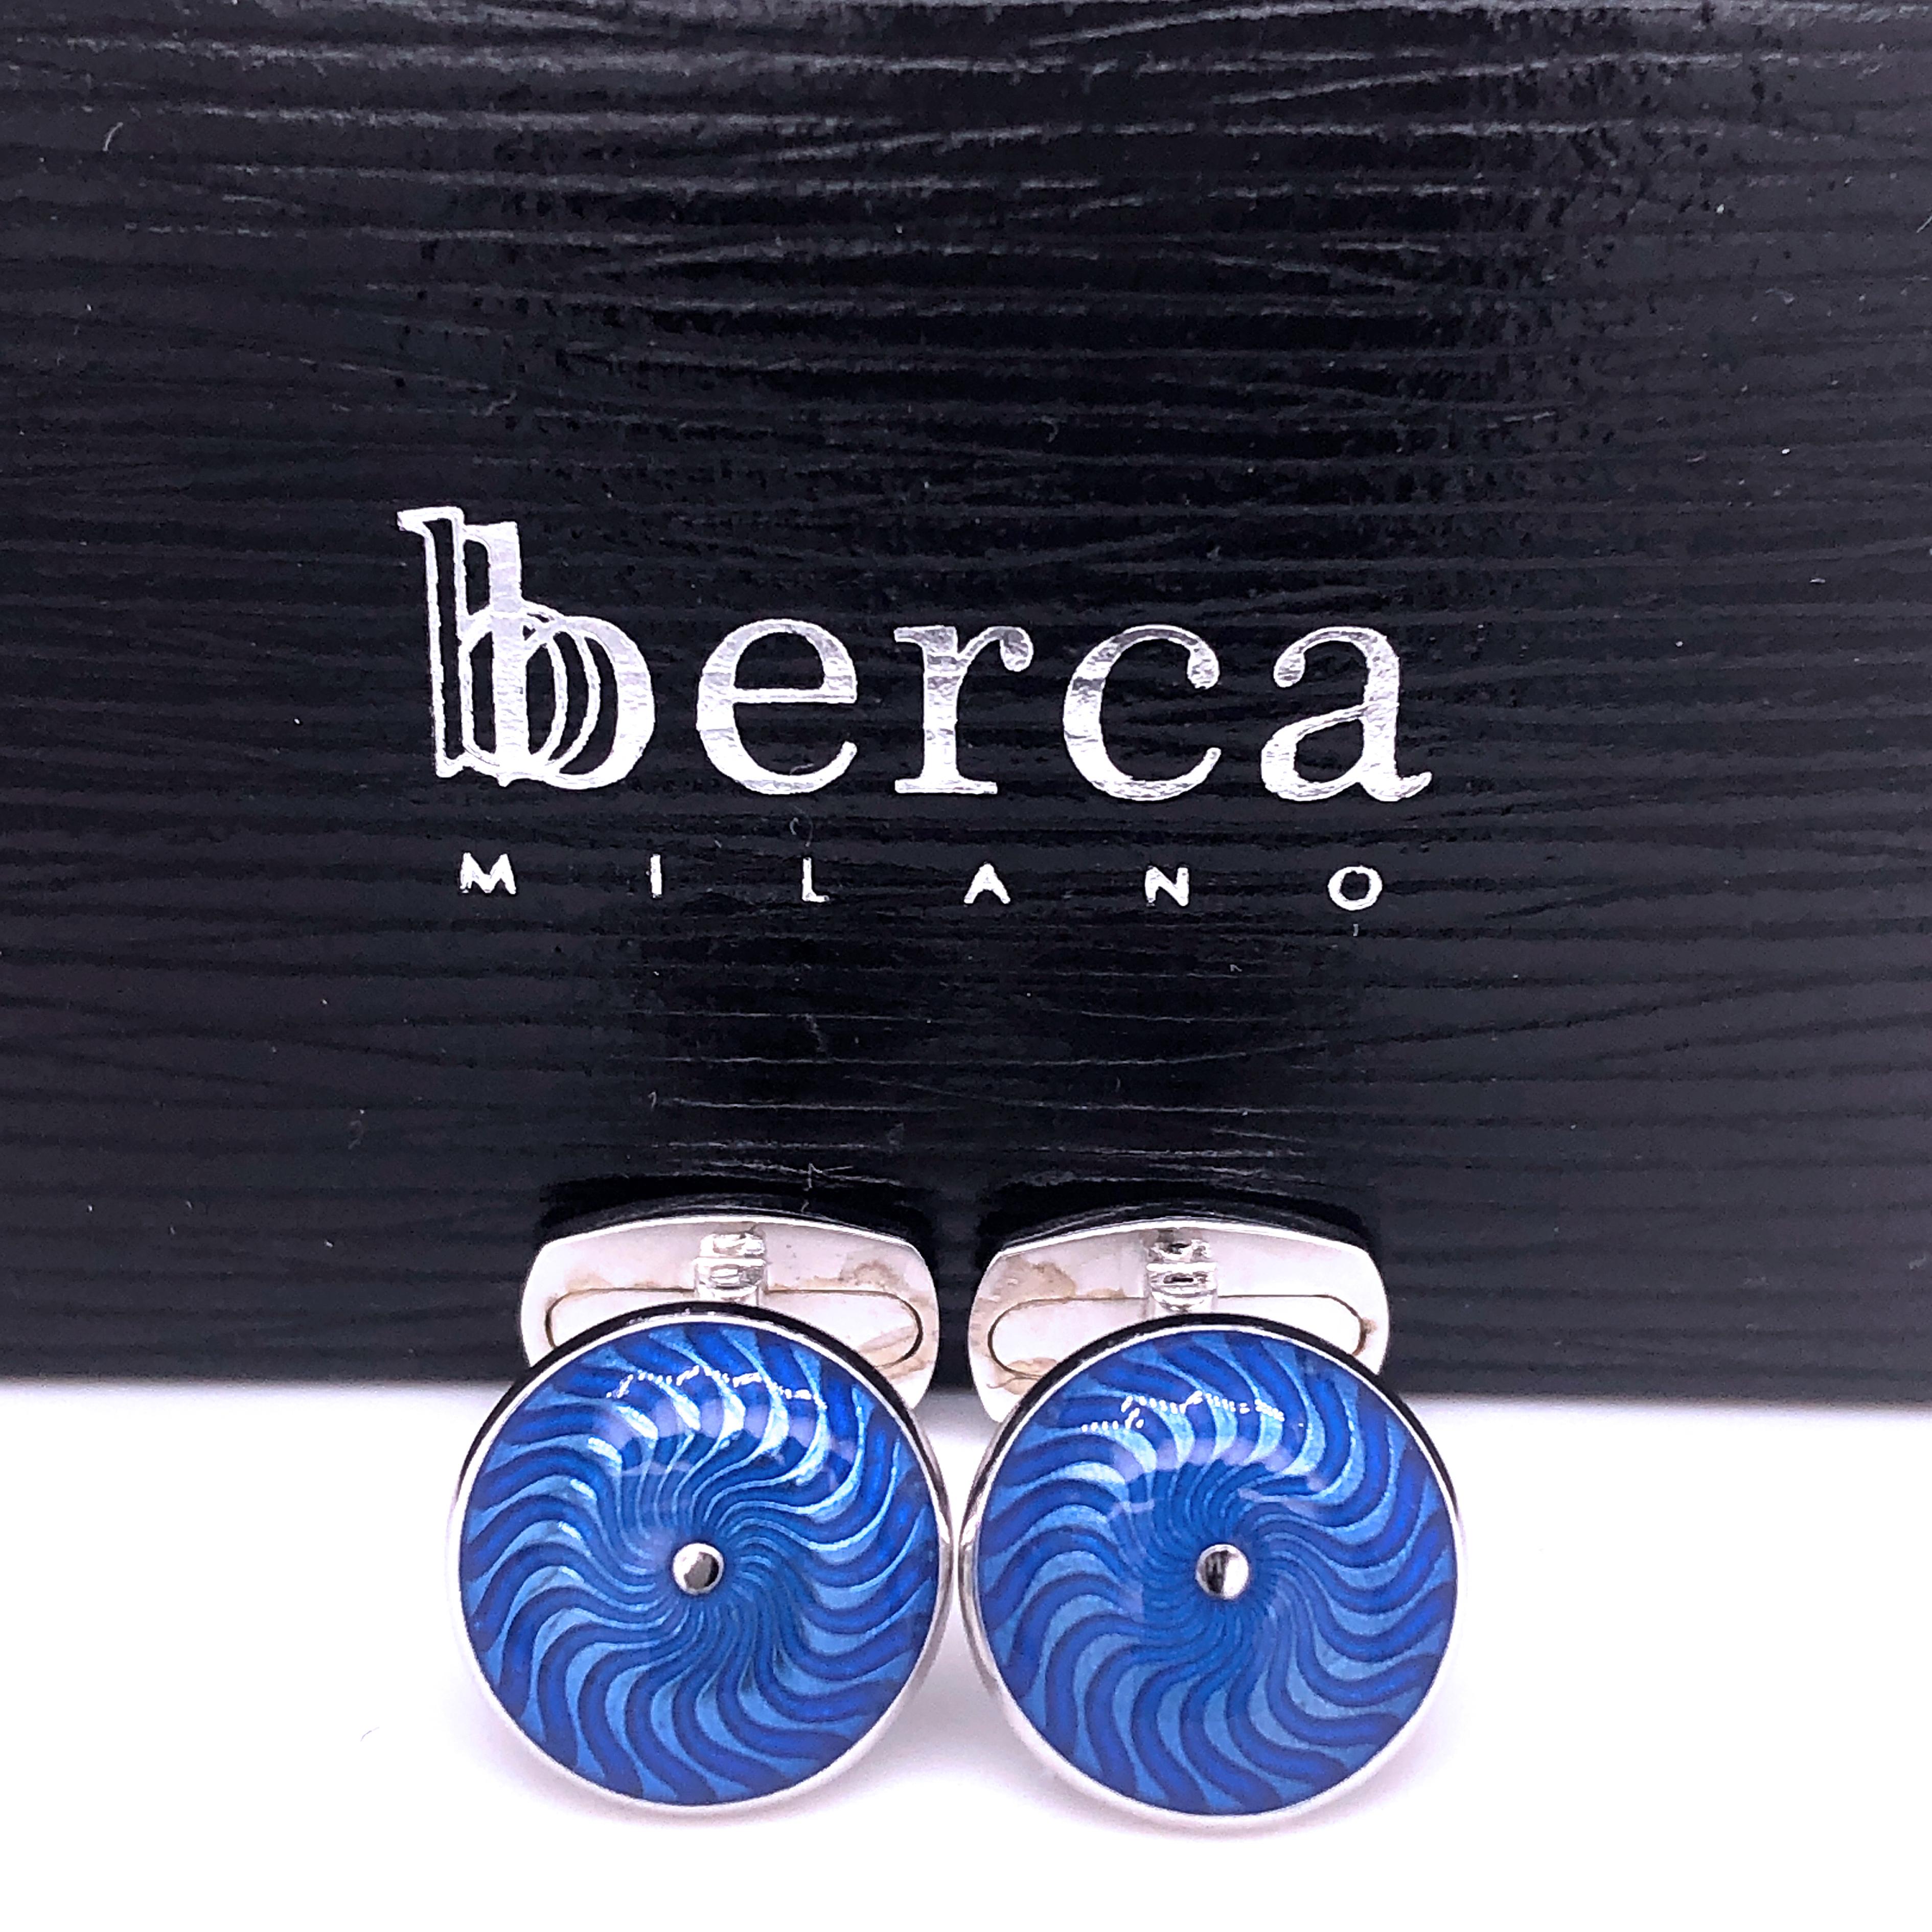 Unique, absolutely Chic yet Timeless Navy Blue Guilloché Hand Enamelled Round Cabochon Shaped Sterling Silver Setting Cufflinks.
In our fitted smart Black Box and Pouch.